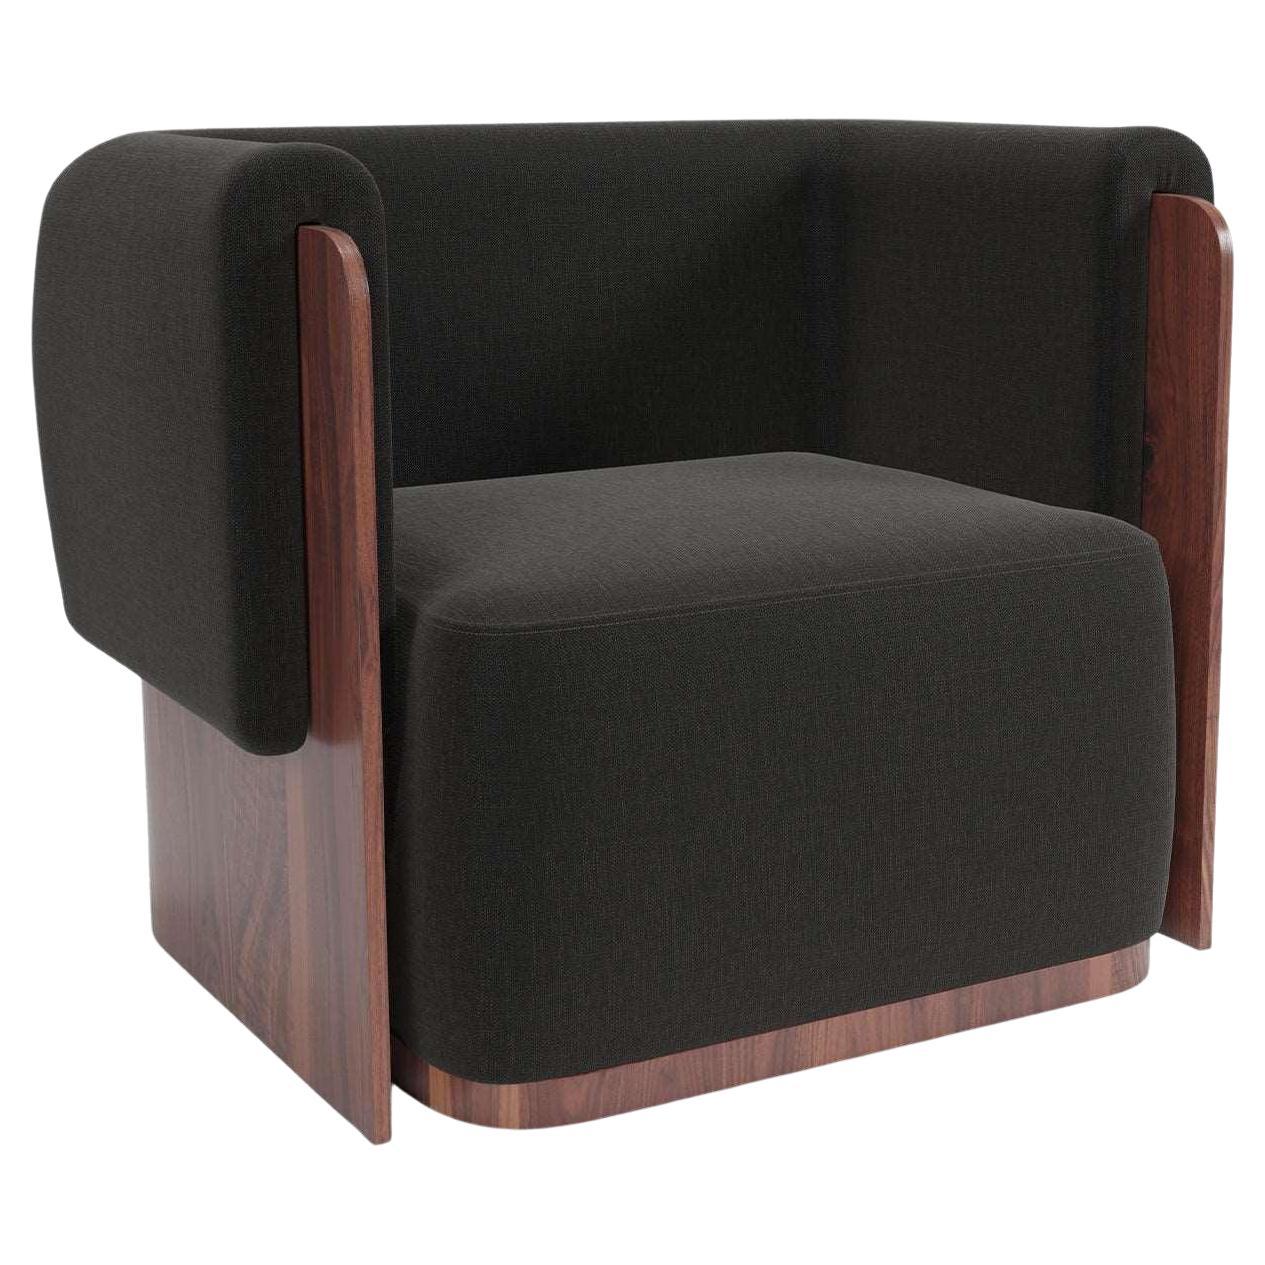 Baika Armchair with Wooden Detail For Sale